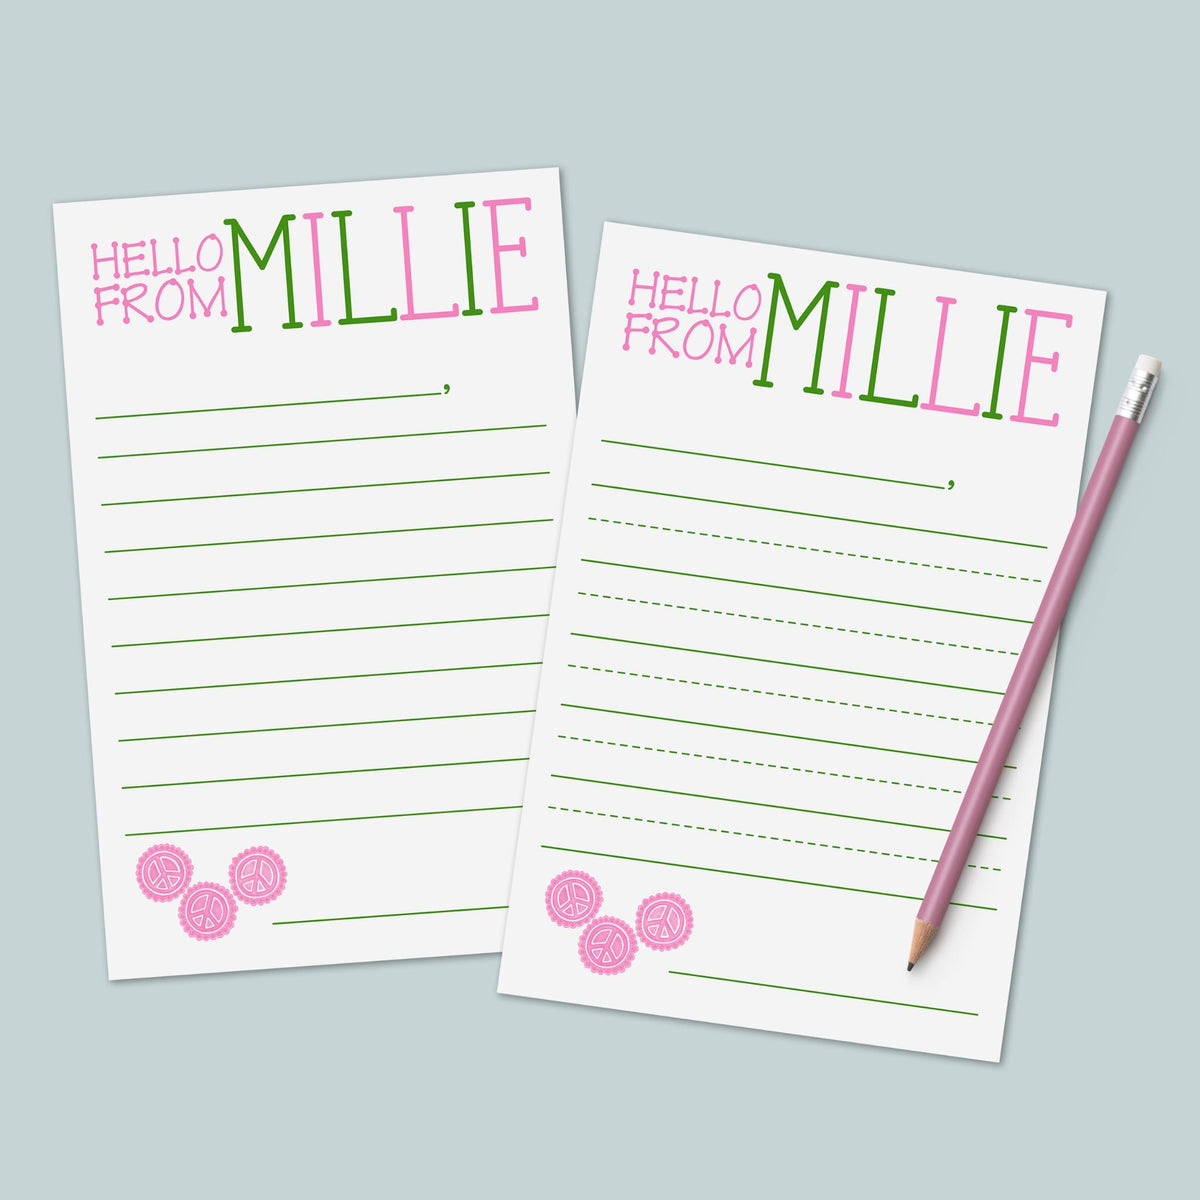 Peace Signs - Personalized Lined Letter Writing Stationery - The Note House